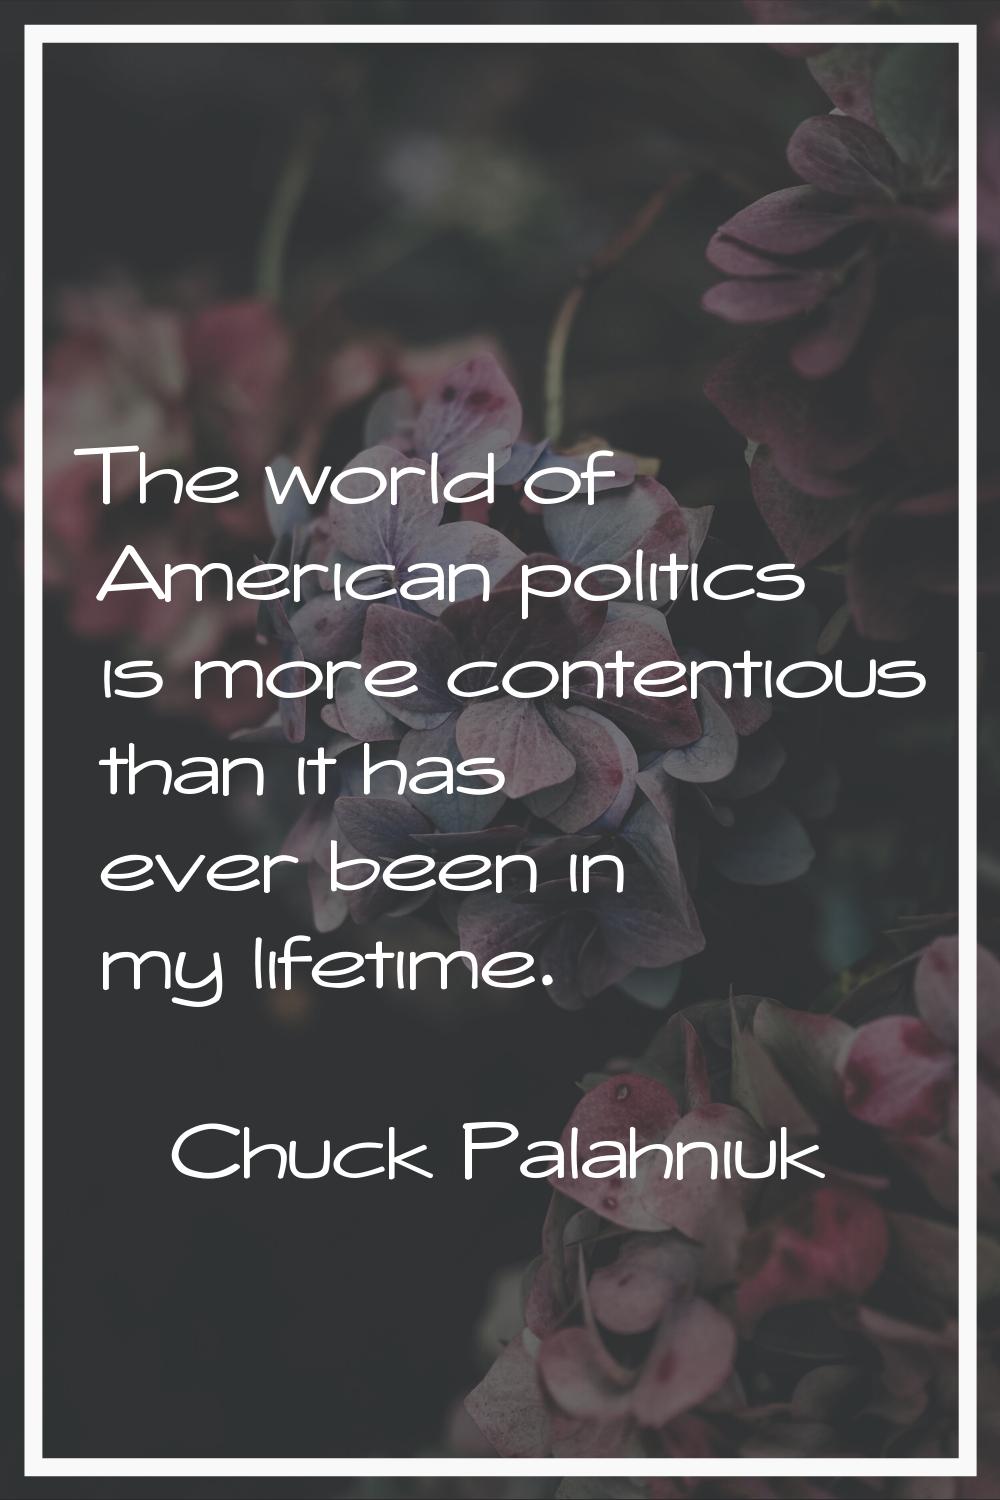 The world of American politics is more contentious than it has ever been in my lifetime.